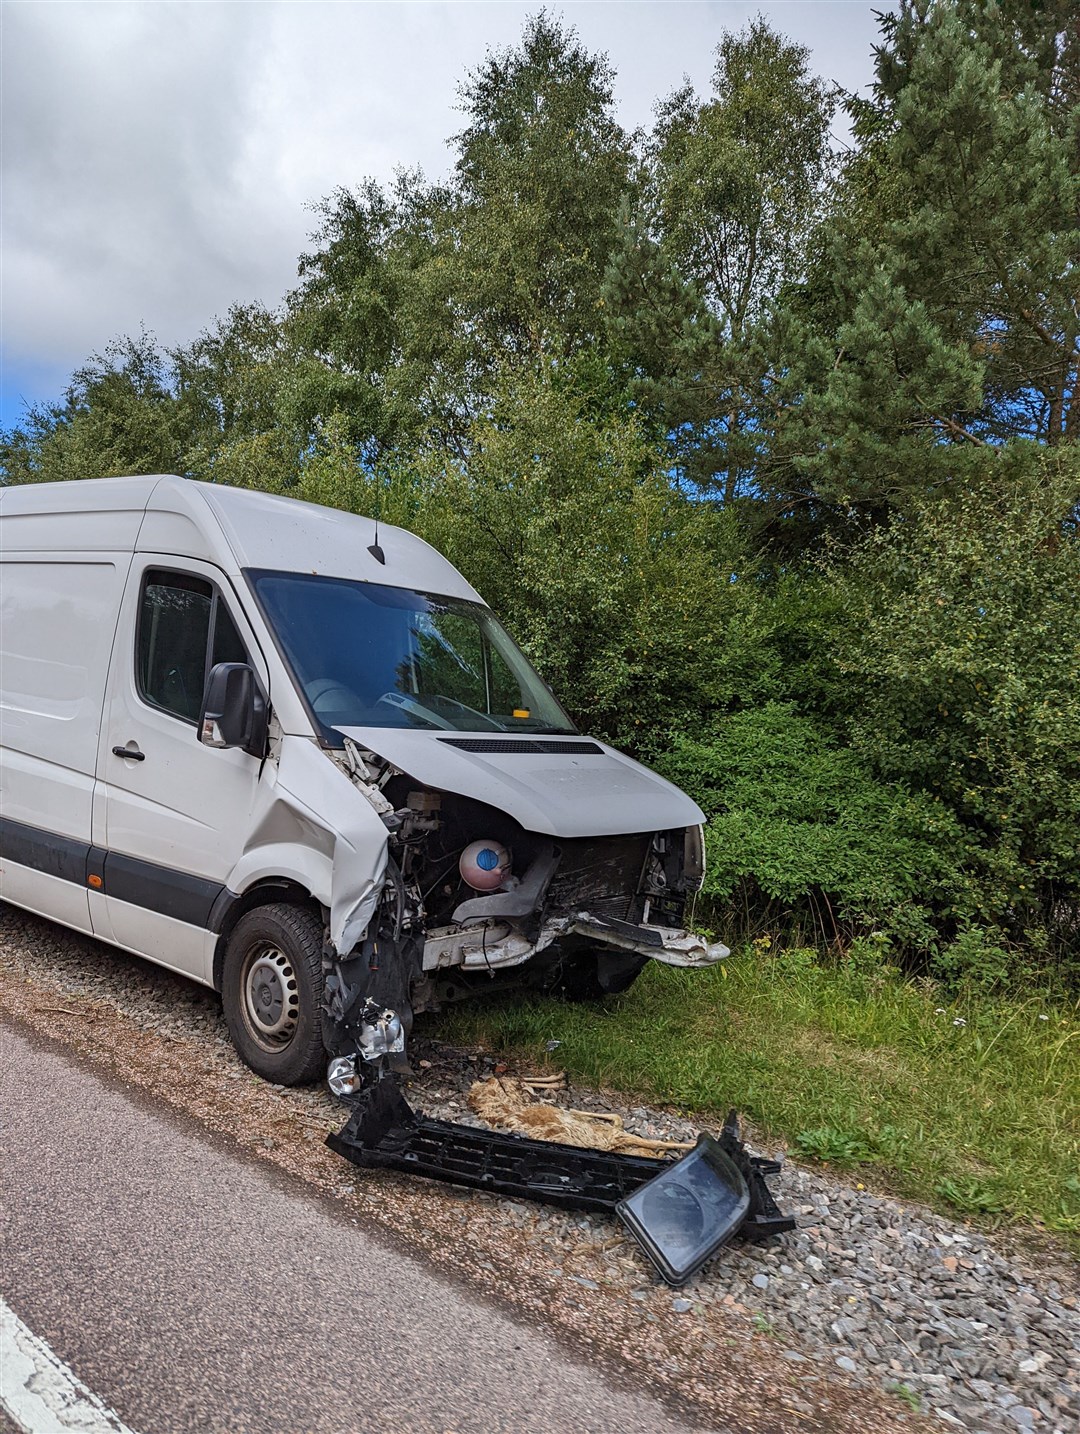 One of the vehicles involved in the accident remains at the side of the A9.